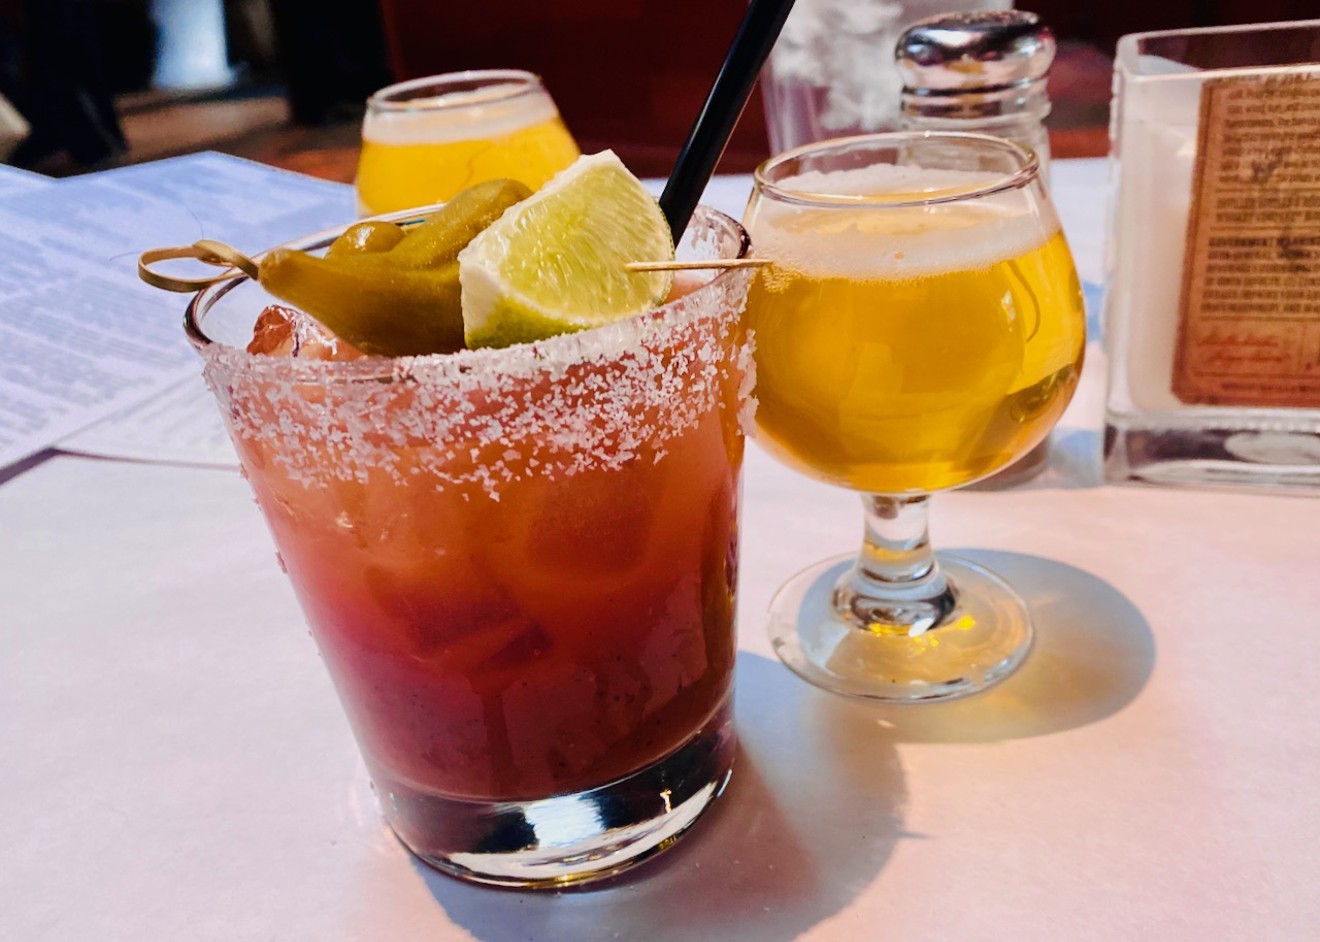 The Moth's Bloody Mary is served with a beer chaser. And this is how Sunday should start.